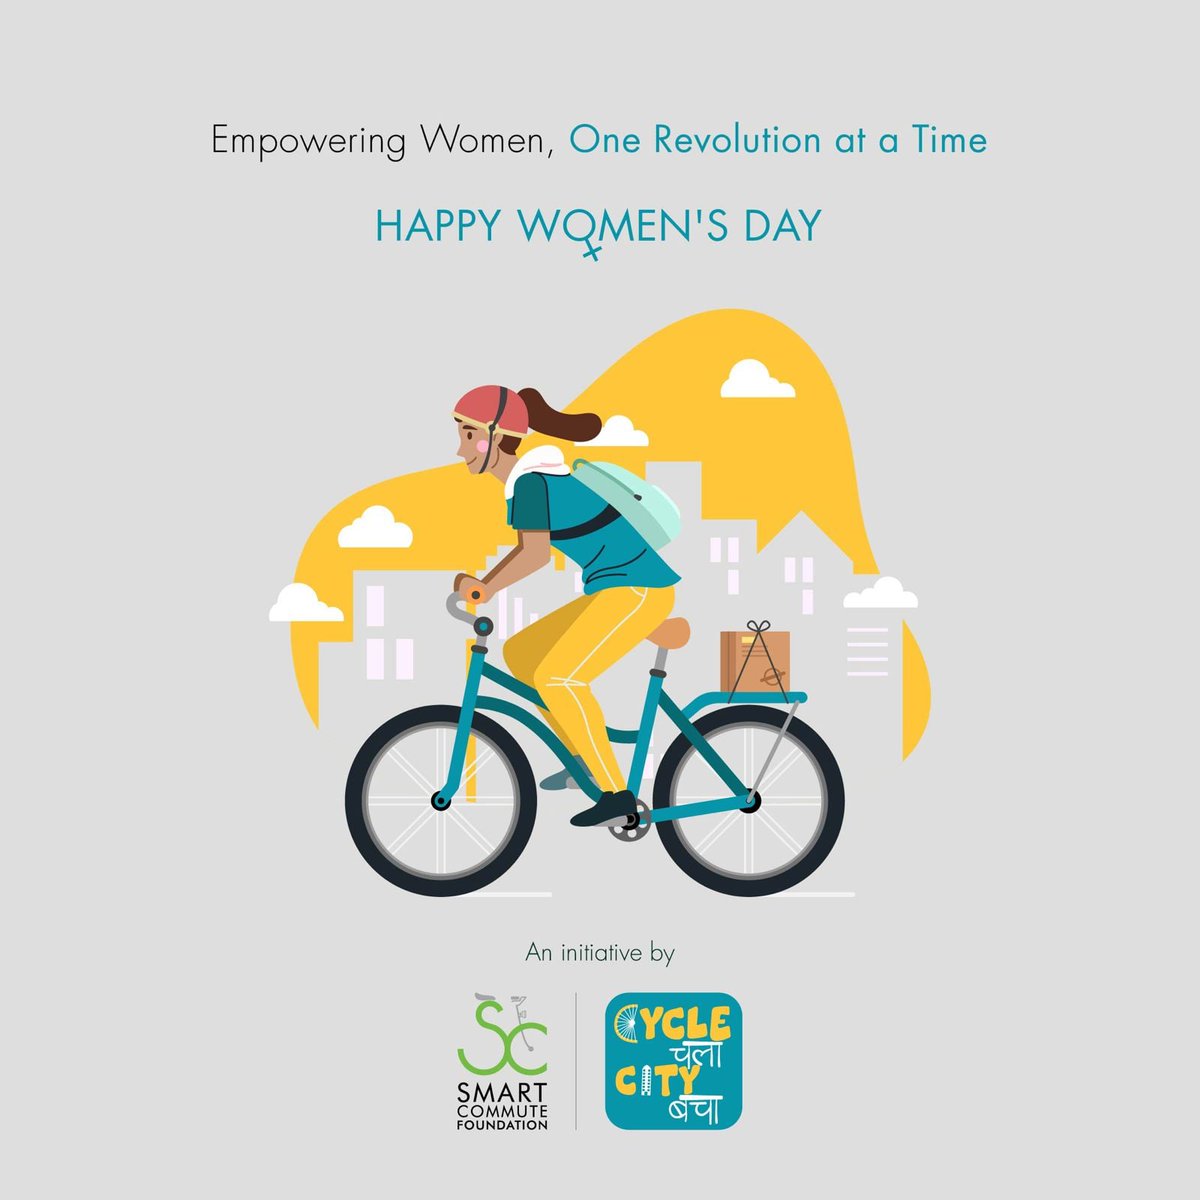 Today, we celebrate your strength, resilience, and achievements. May you continue to break barriers and inspire others every day. Remember, just like cycling, life is about balance, perseverance, and moving forward one pedal at a time. Keep riding high, ladies! 🚲 #HappyWomensDay